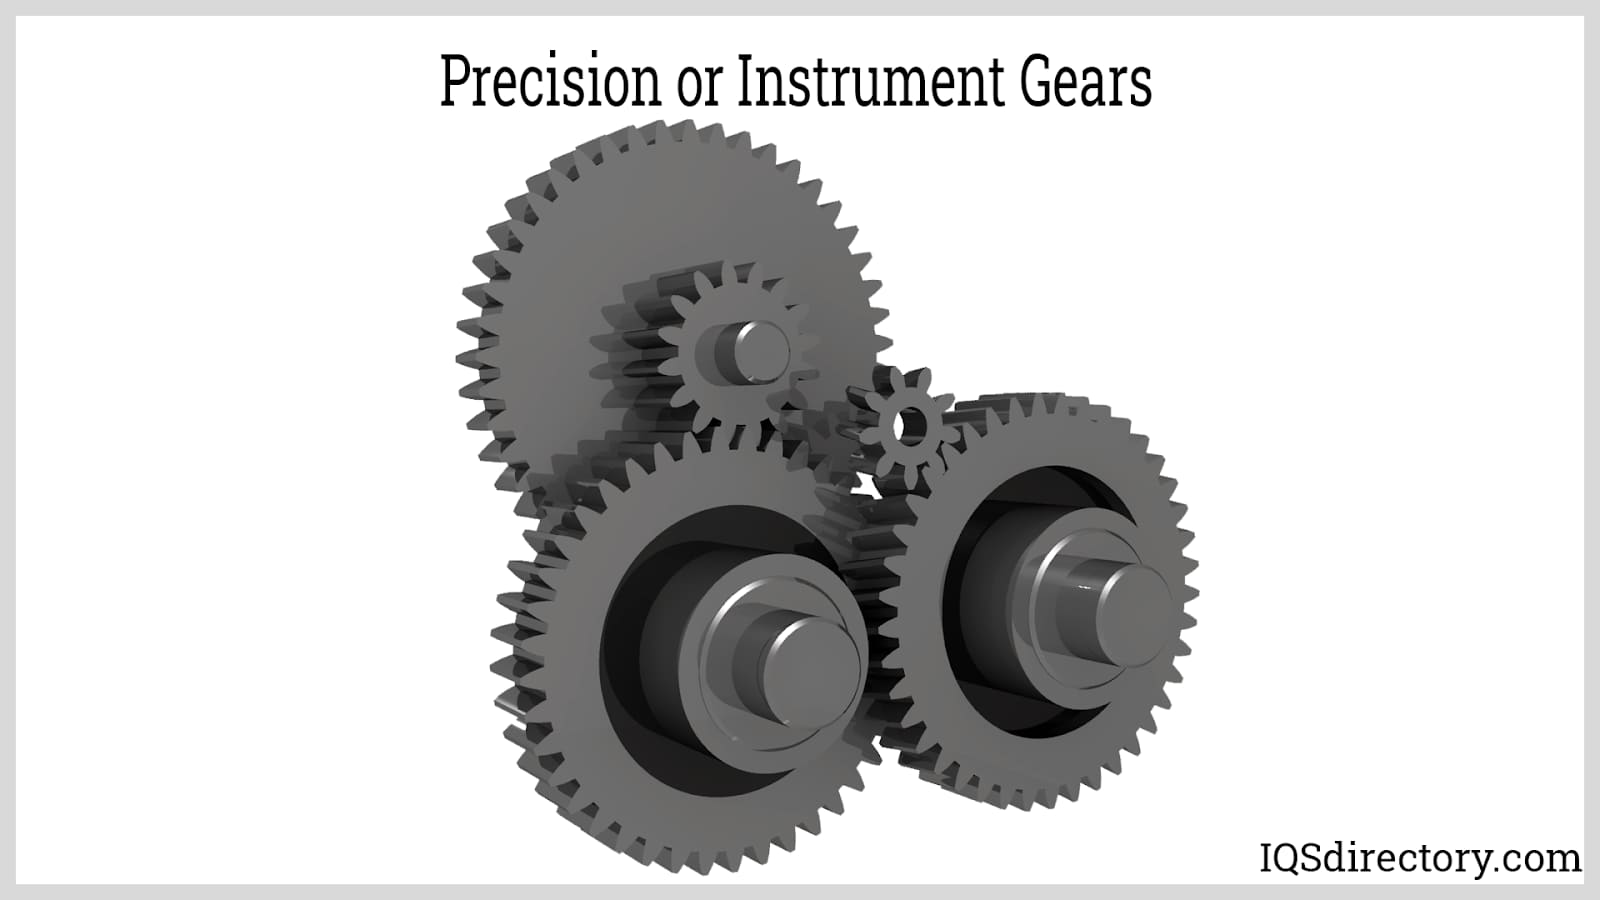 Precision or Instrument Gears